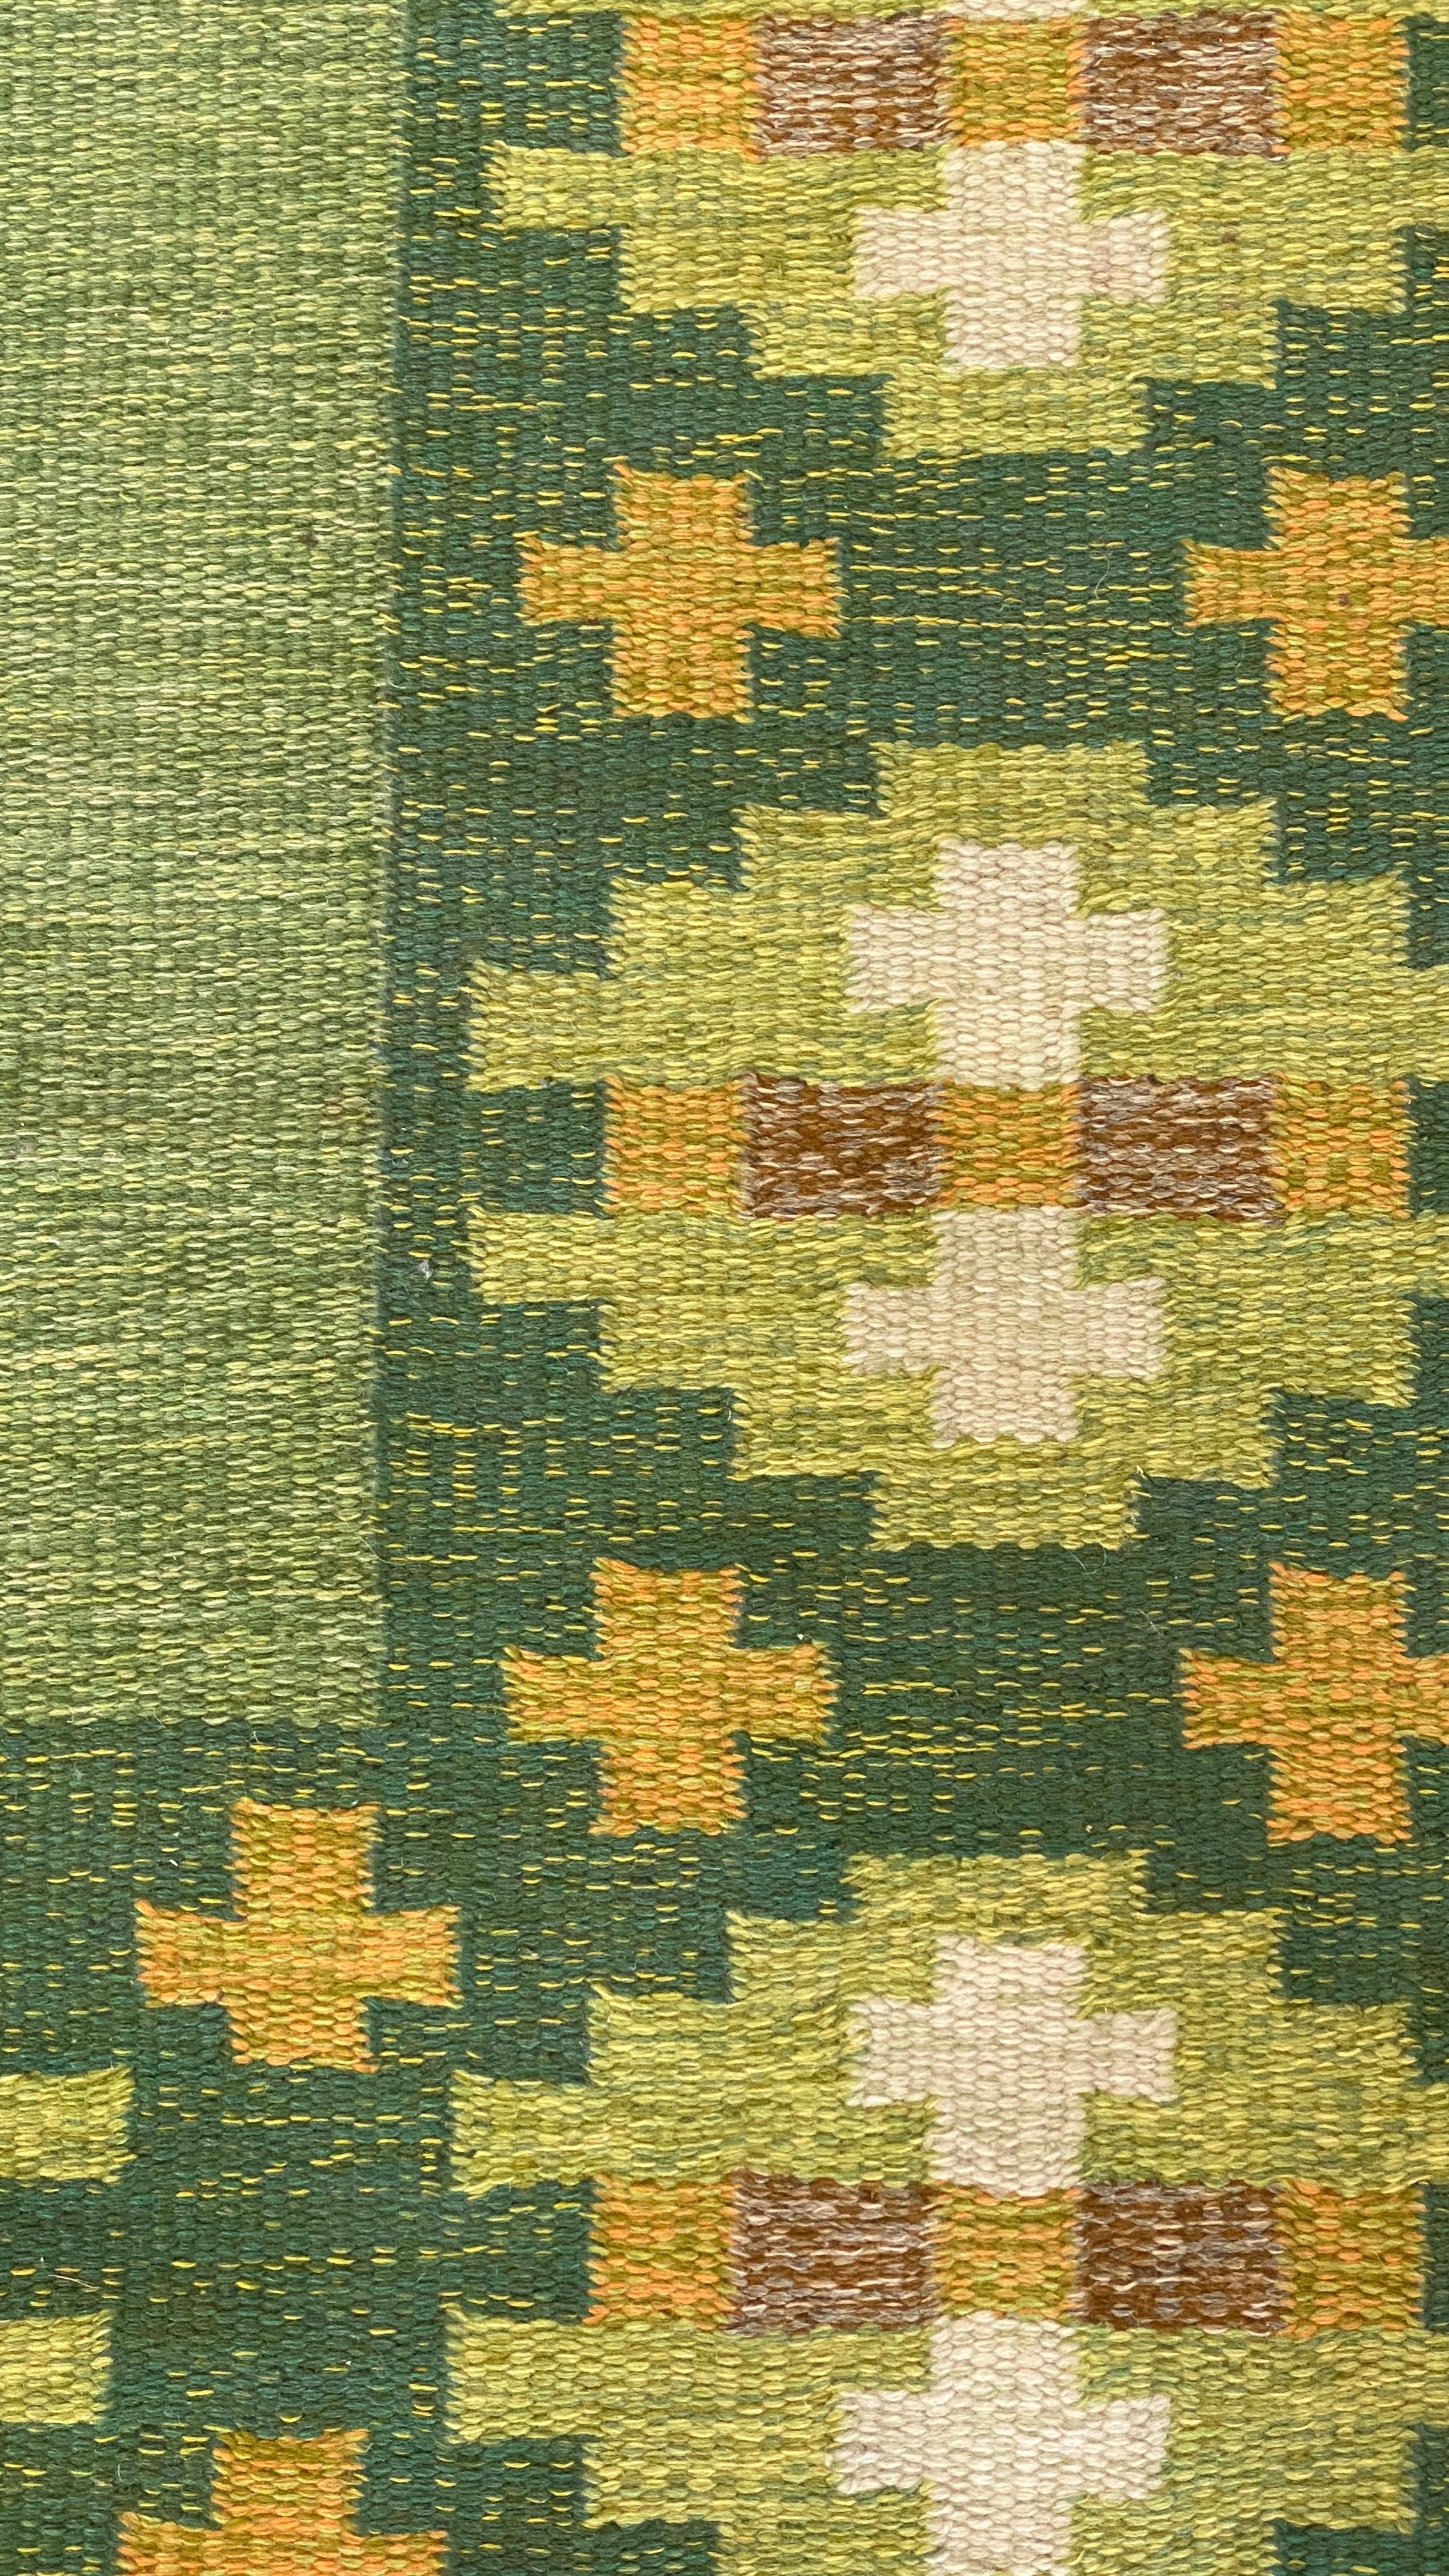 A handwoven modernist flat-weave carpet / rug by Birgitta Södergren. Most likely woven in the 1950s. Handwoven in wool, using a Kilim technique. Signed

Follows a lineage of modernist rugs produced in Sweden throughout the 20th century. Other